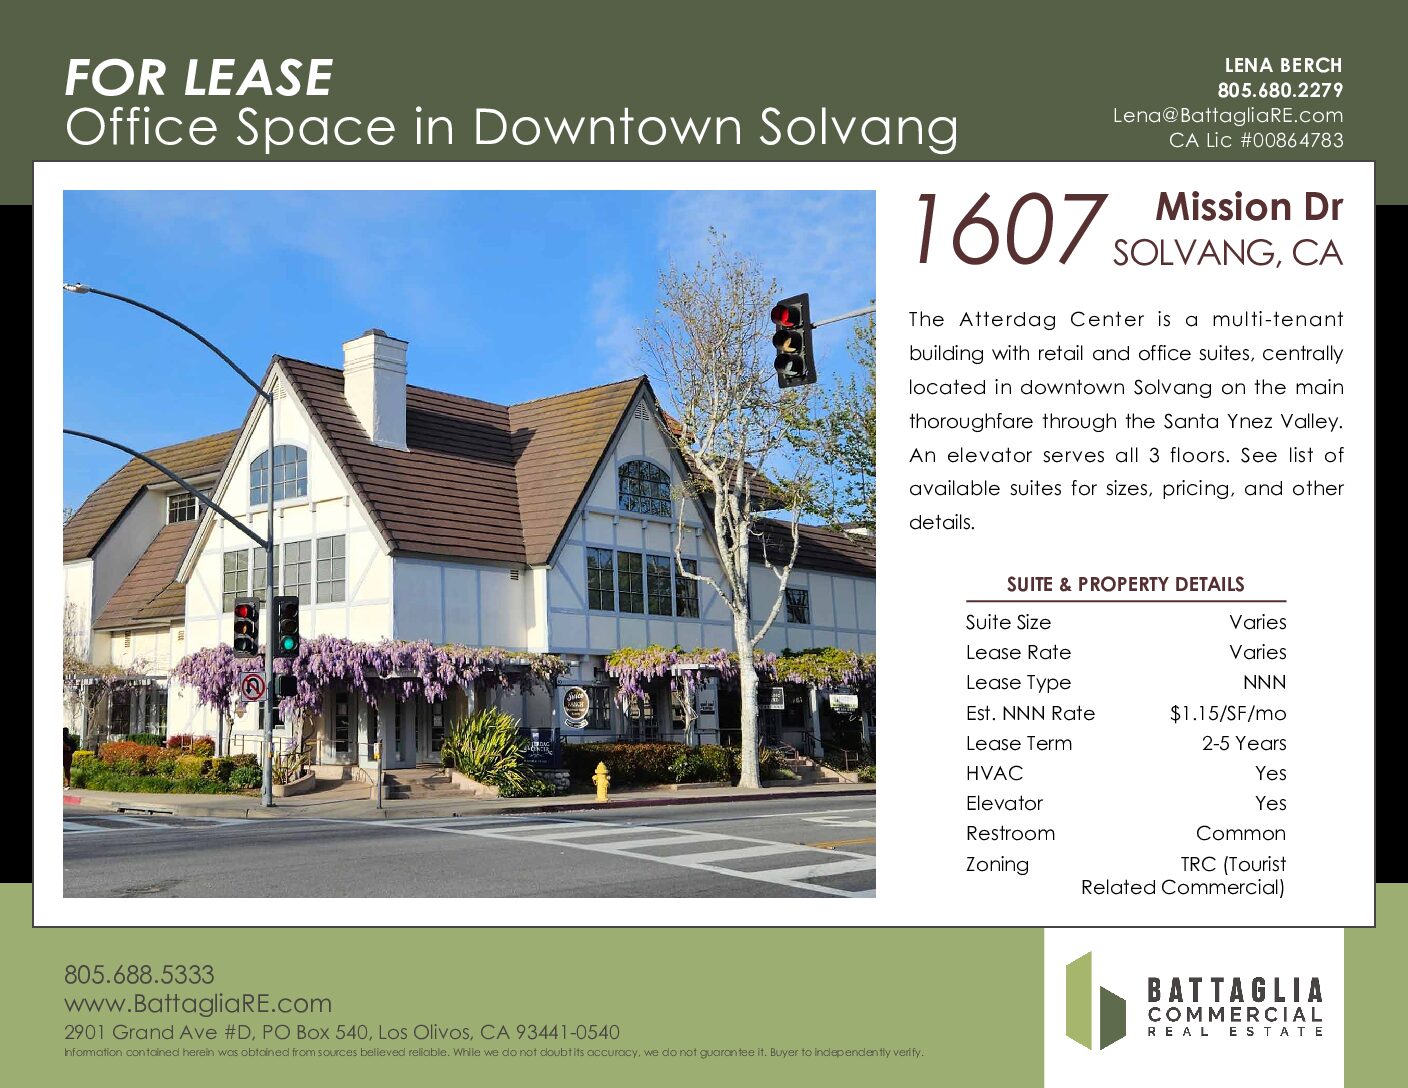 1607 Mission Dr Office Flyer BCRE